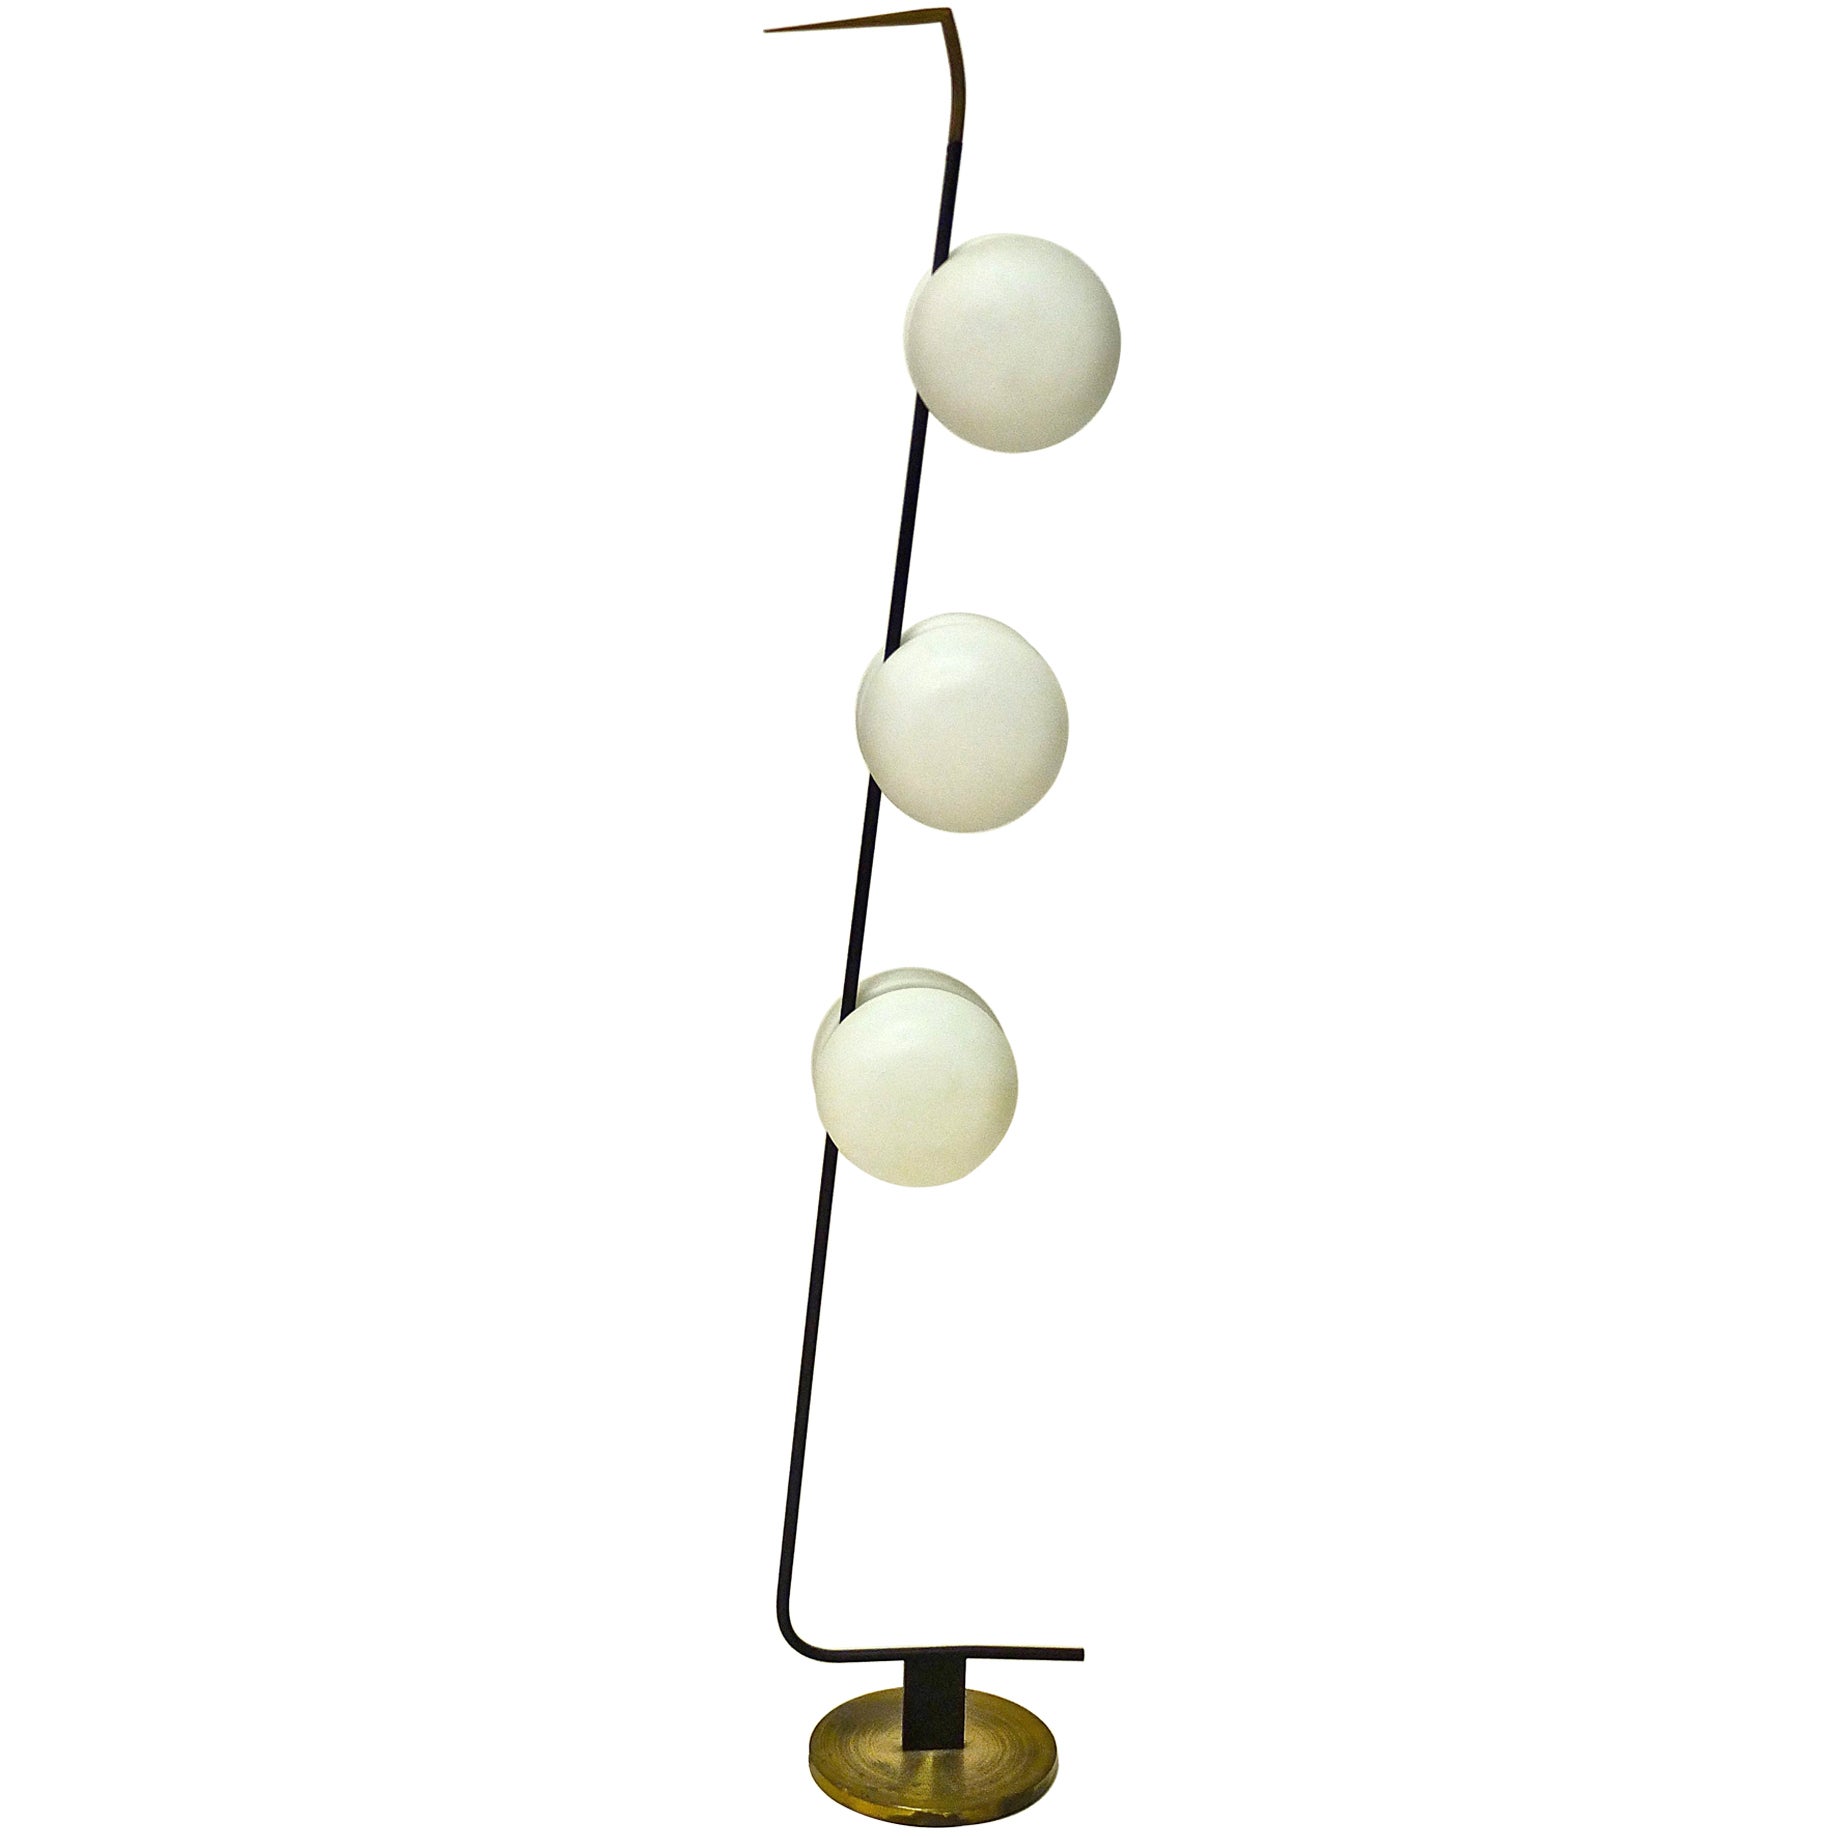 French 1950's 6 Globe Floor Lamp by Lunel